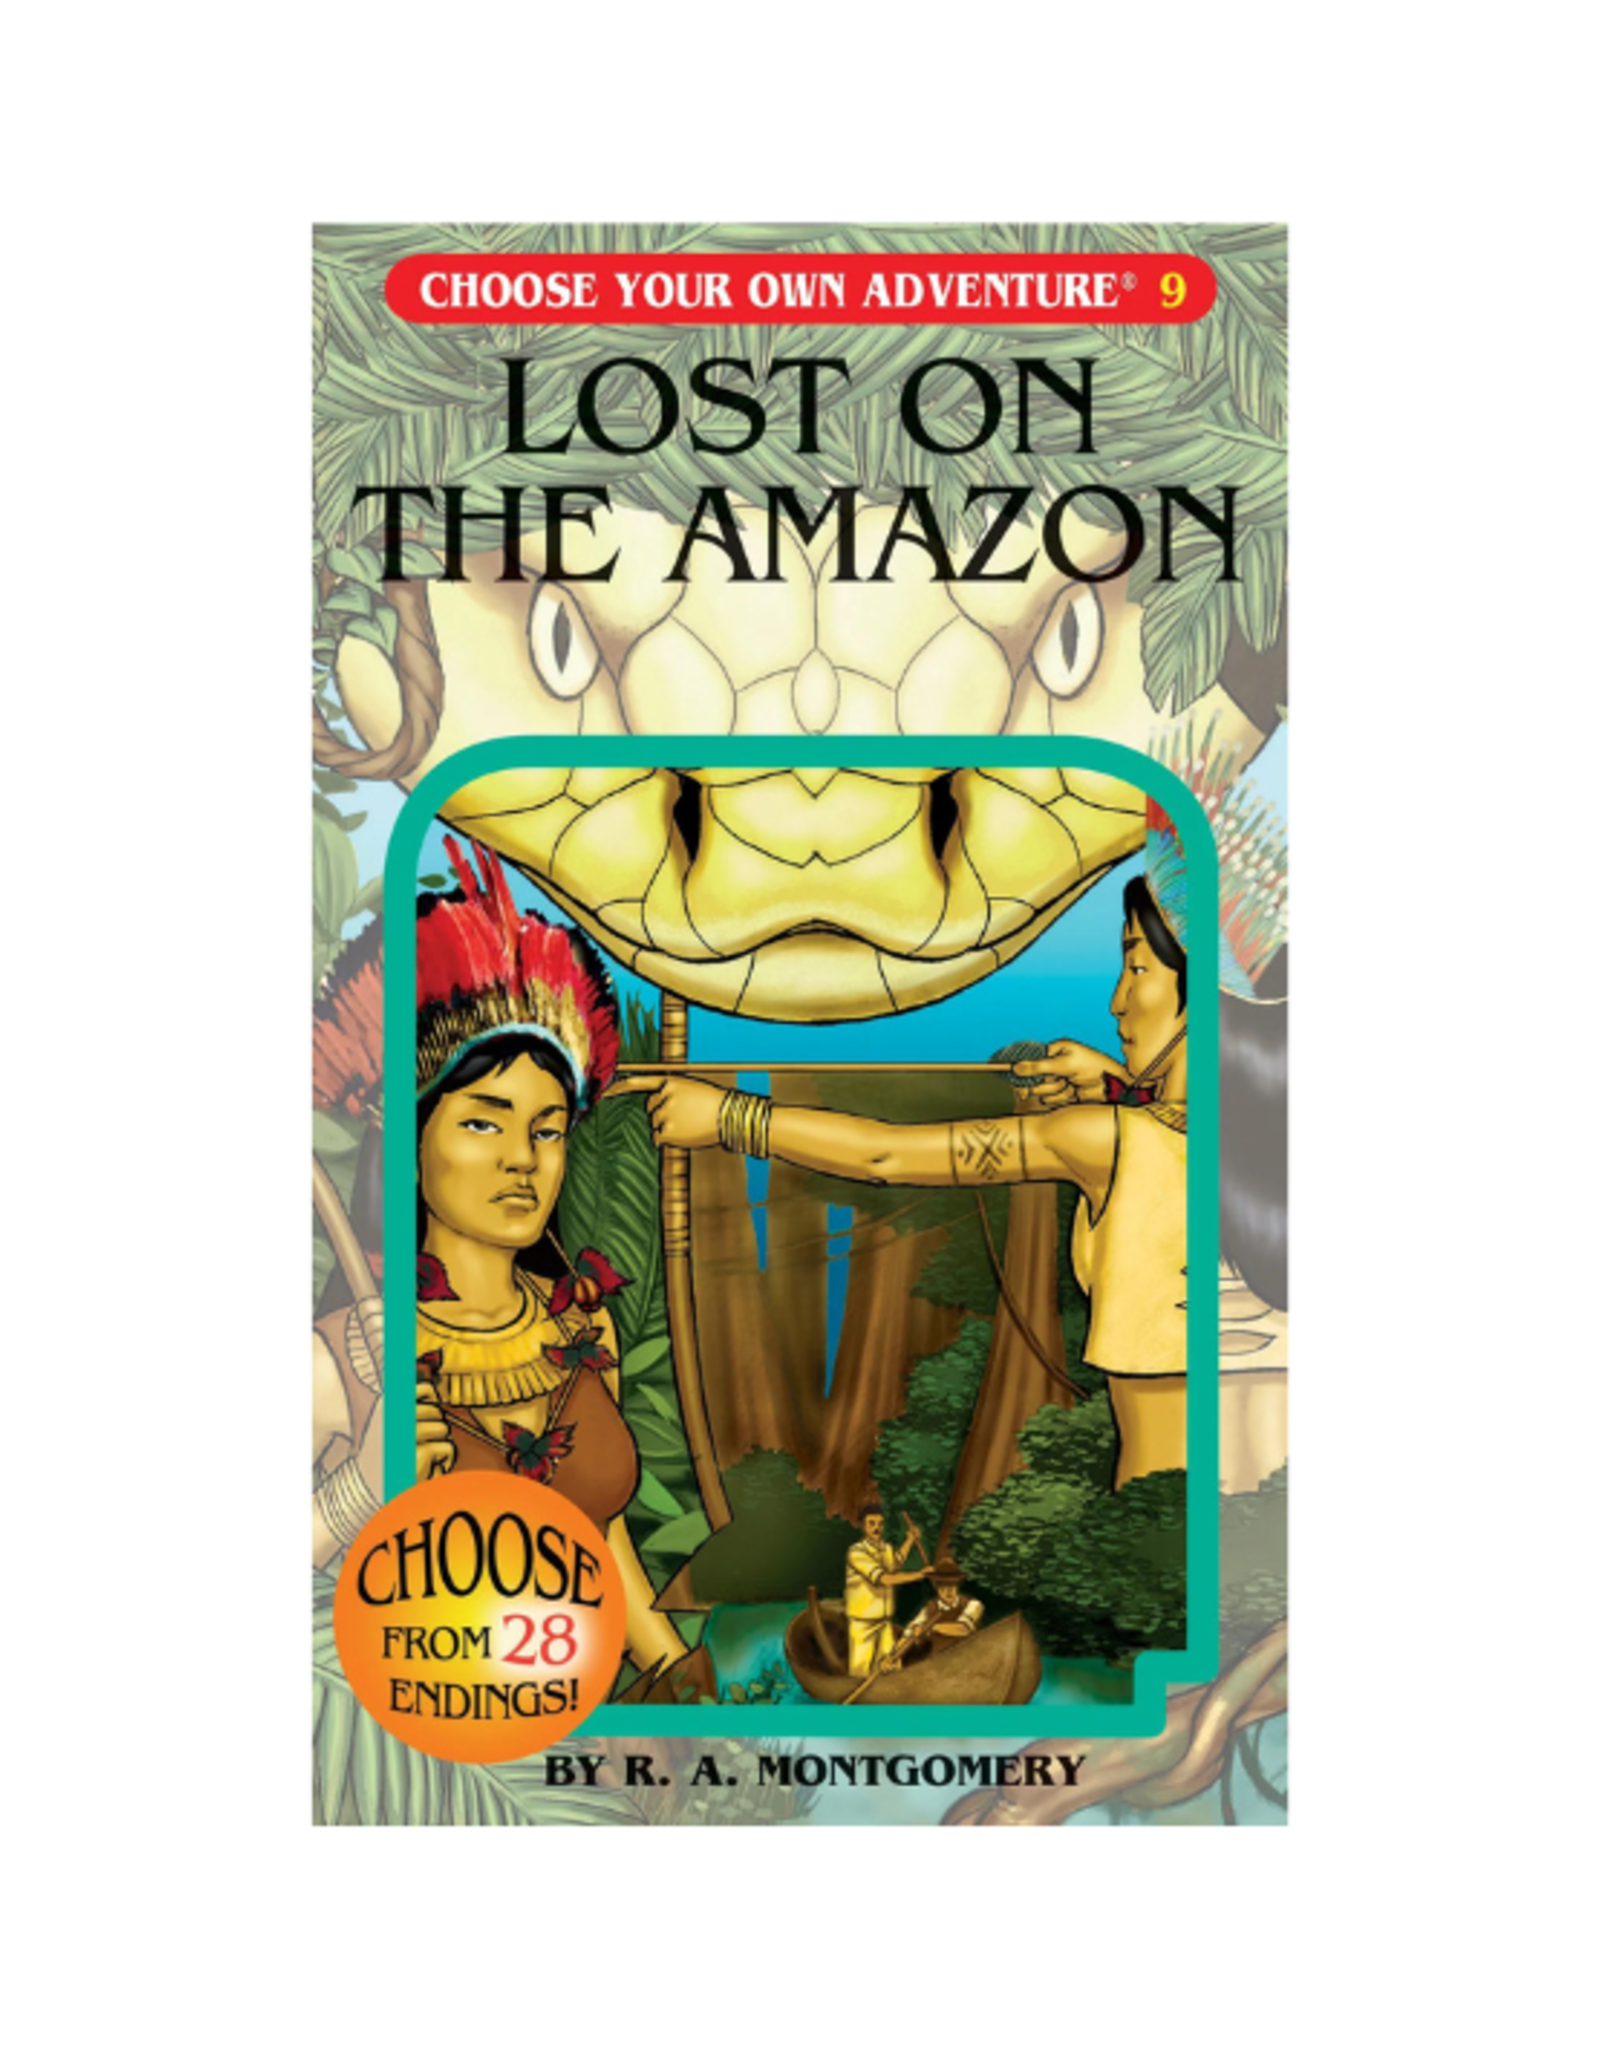 Choose Your Own Adventure Book - Choose Your Own Adventure - Lost on the Amazon